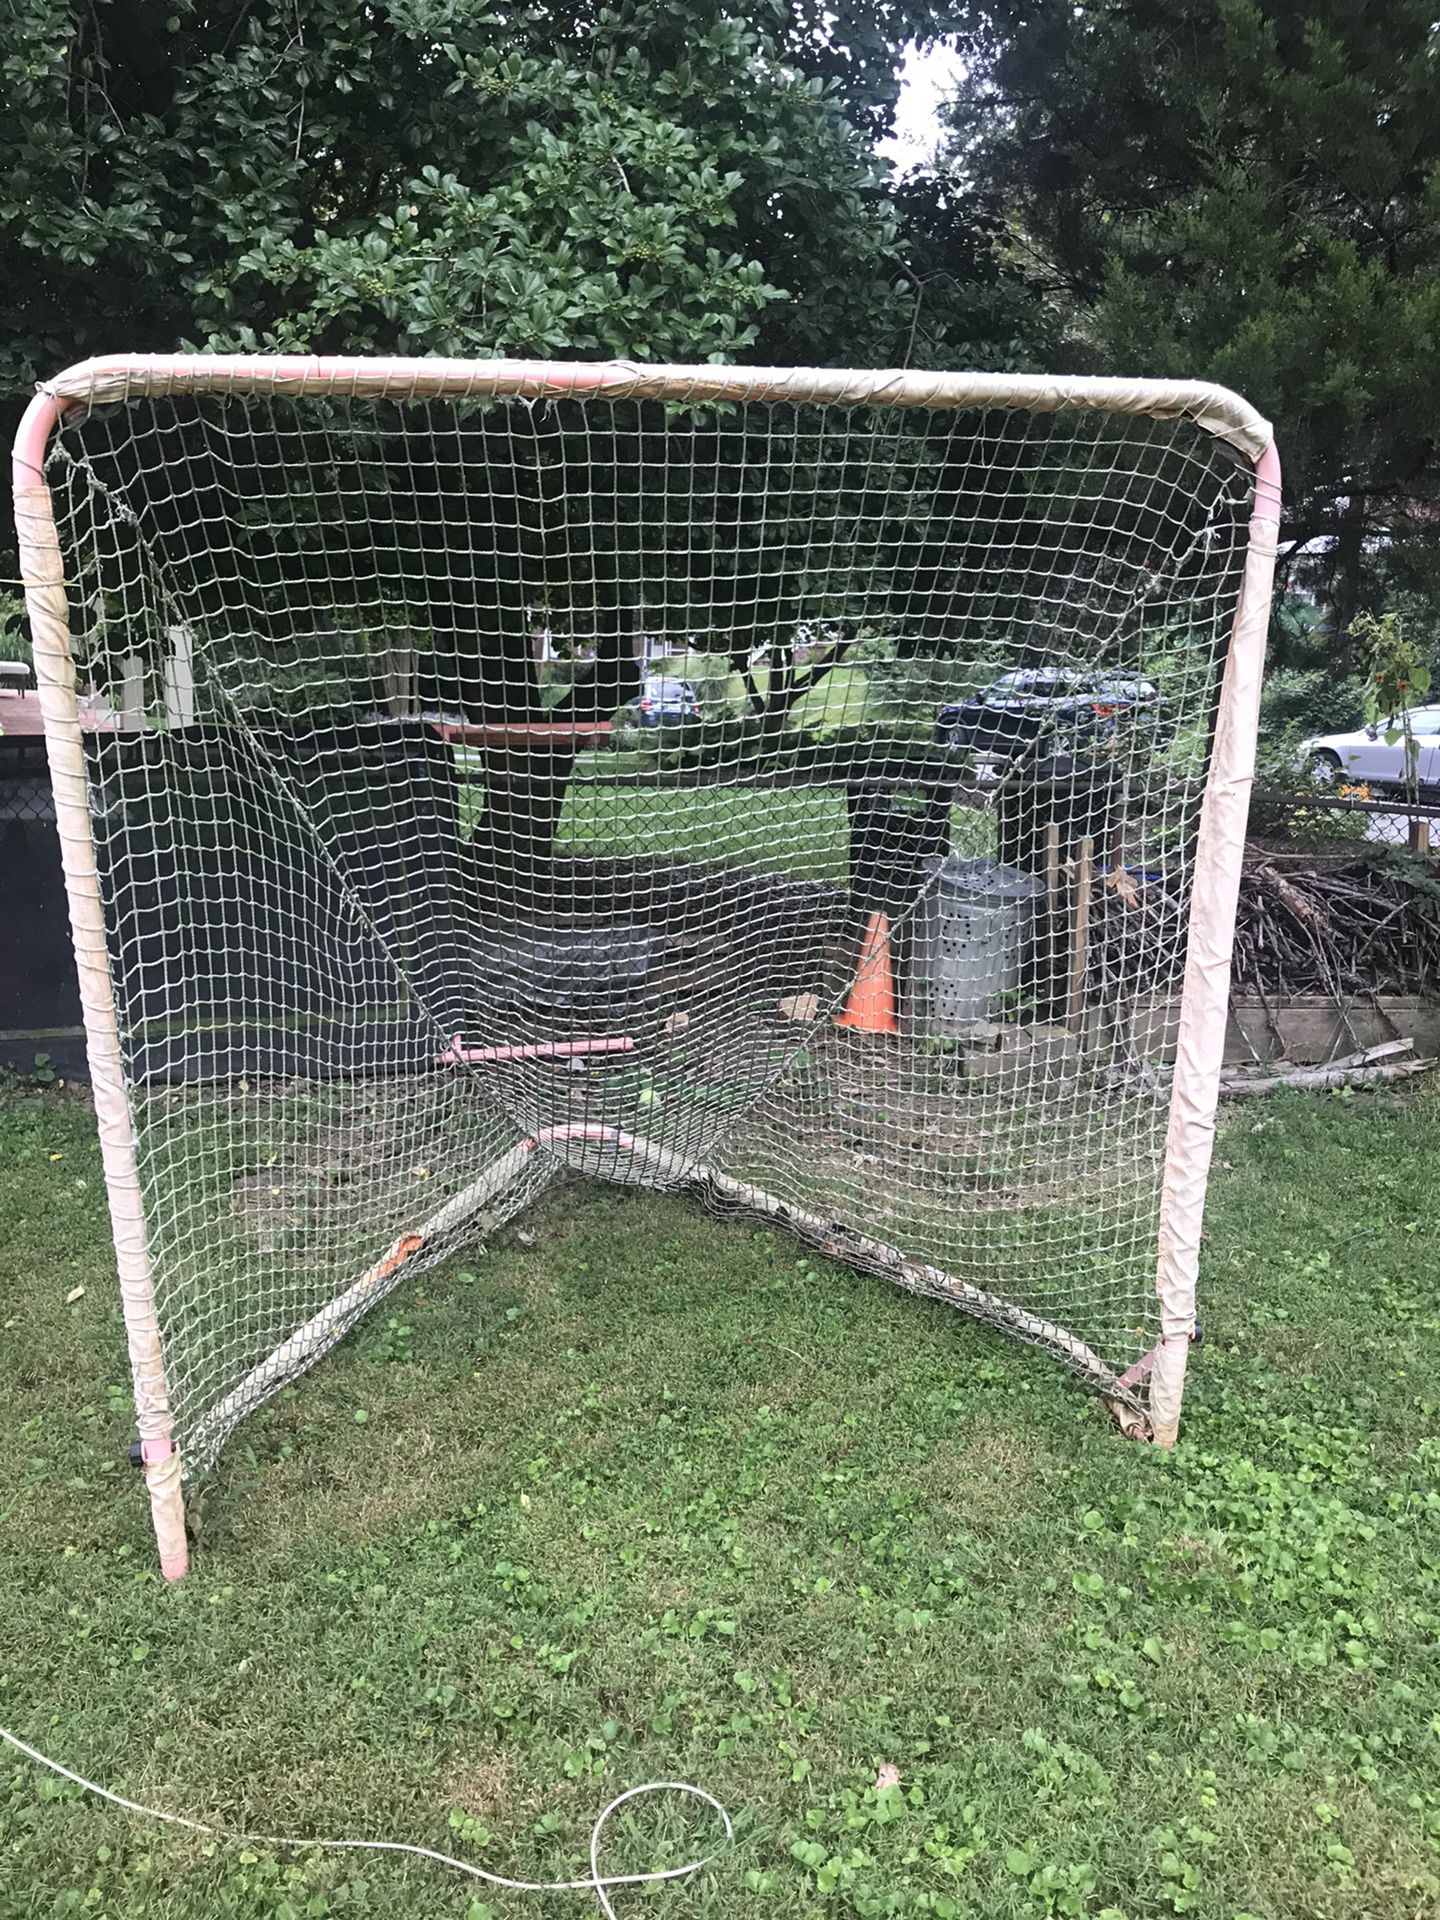 Lacrosse goal and rebounder